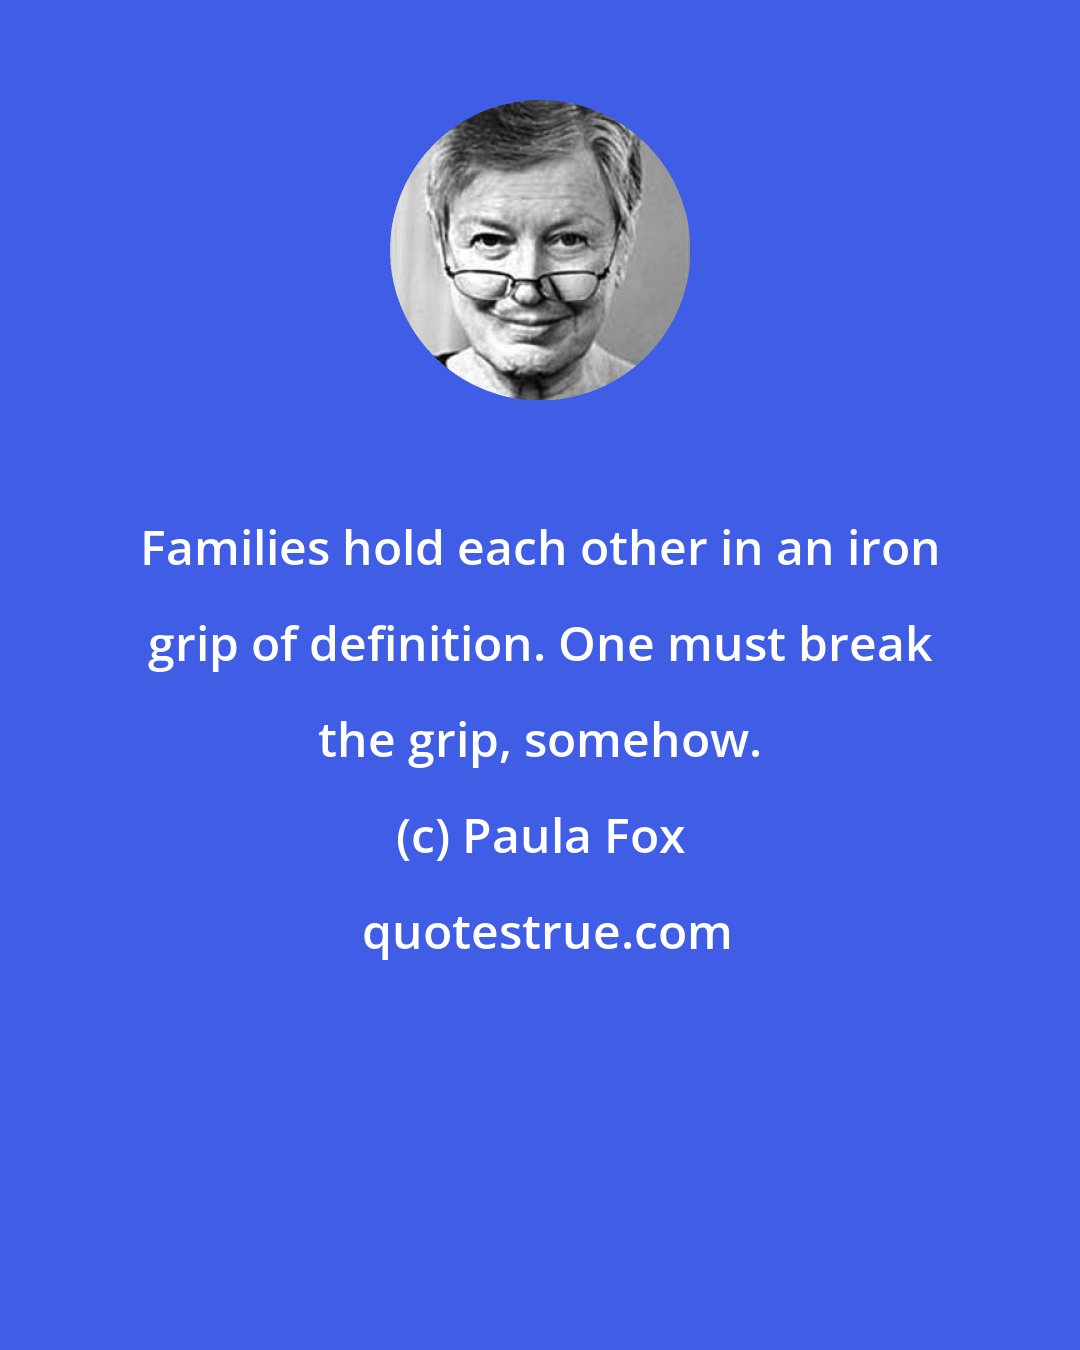 Paula Fox: Families hold each other in an iron grip of definition. One must break the grip, somehow.